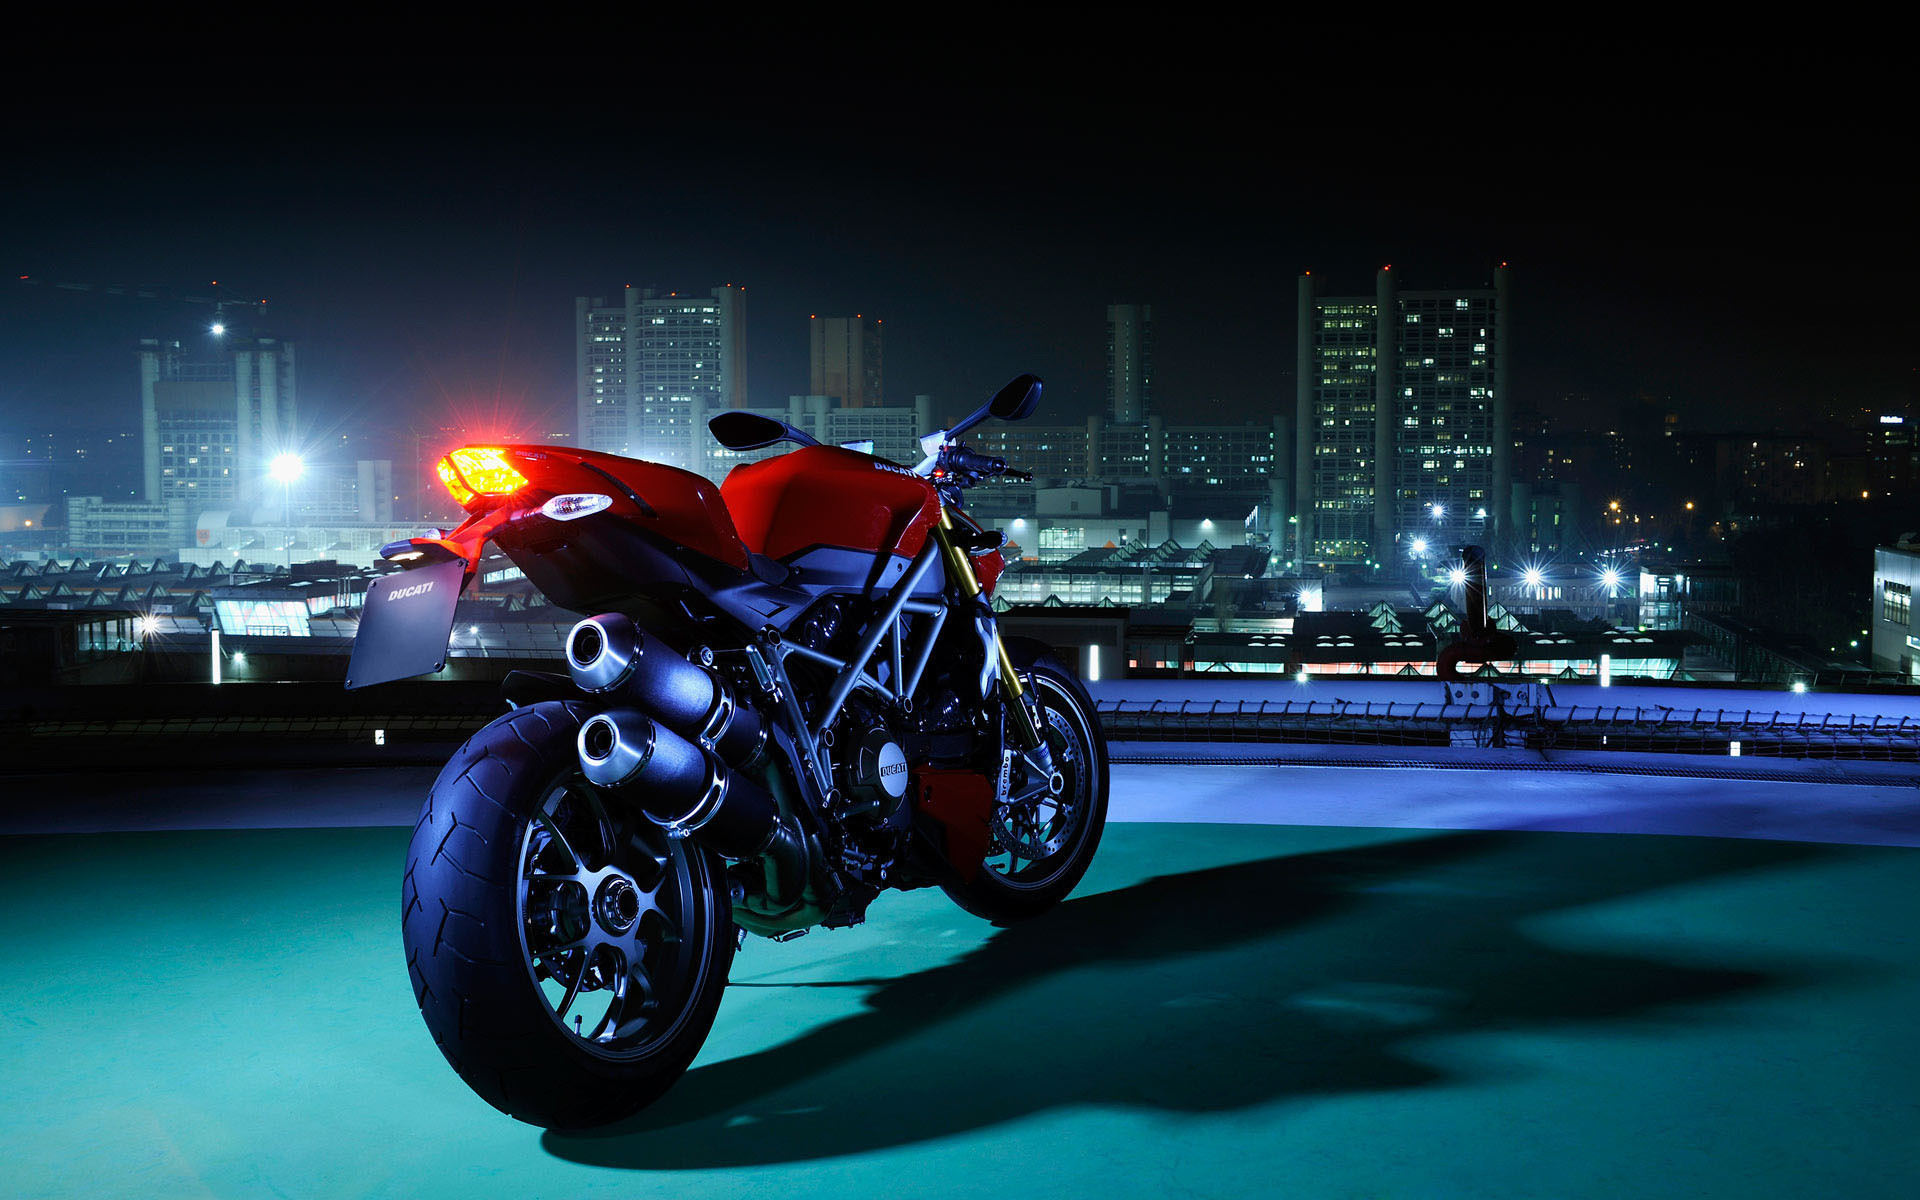 Ducati Monster wallpapers and images   wallpapers pictures photos